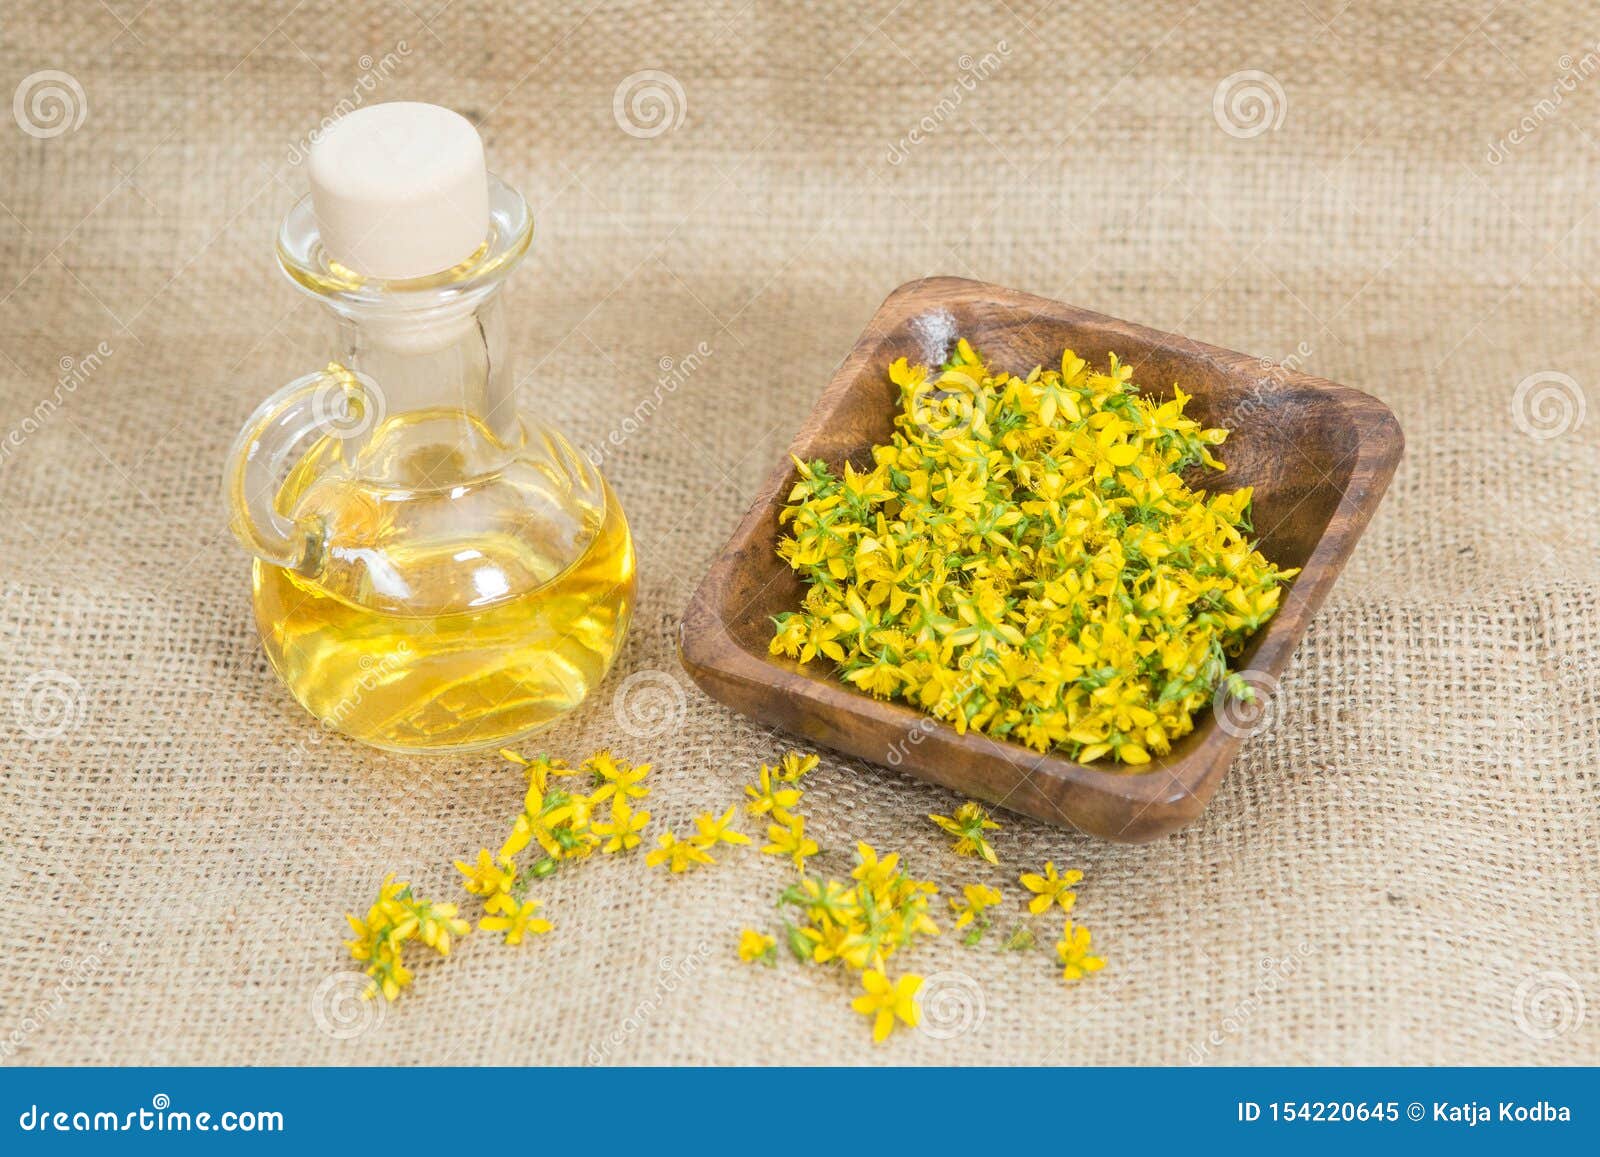 perforate st john`s-wort is very rare and healthy plant